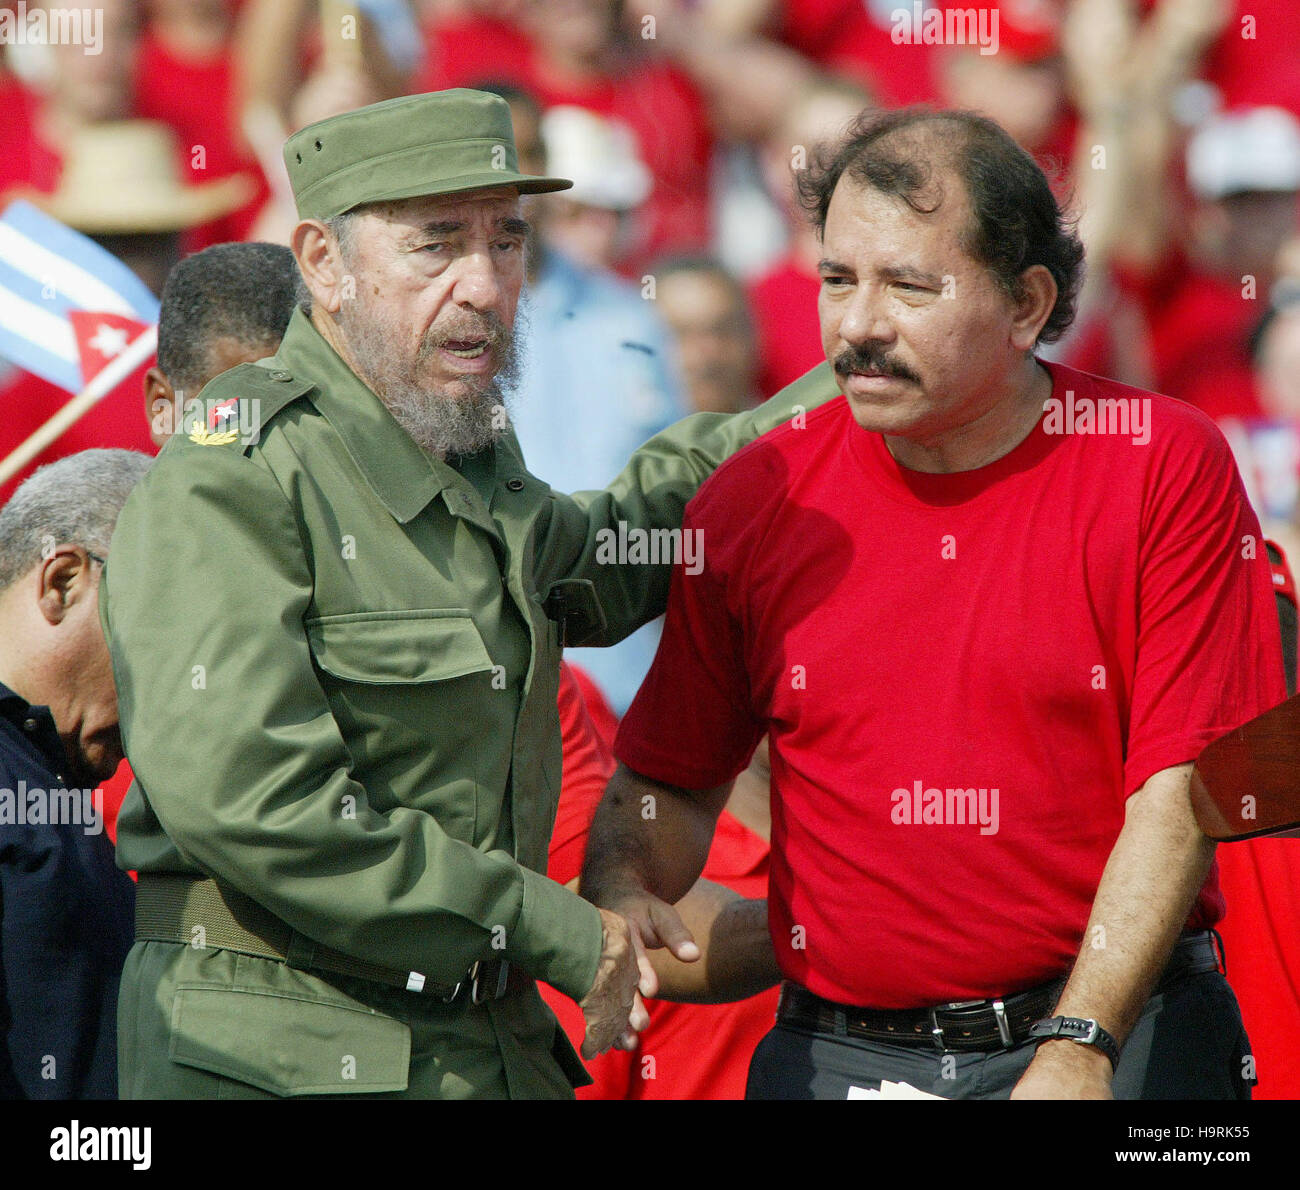 Cuban President Fidel Castro (left) shakes hands wuith Daniel Ortega, Secretary of the 'Sandinista Front' of Nicaragua, while observes the parade of May Day, Havana, Cuba, 2005. In the present year, the Cuban Government has made financial reforms trying to reactivate his economy. May 1, 2005. Credit: Jorge Rey/MediaPunch Stock Photo